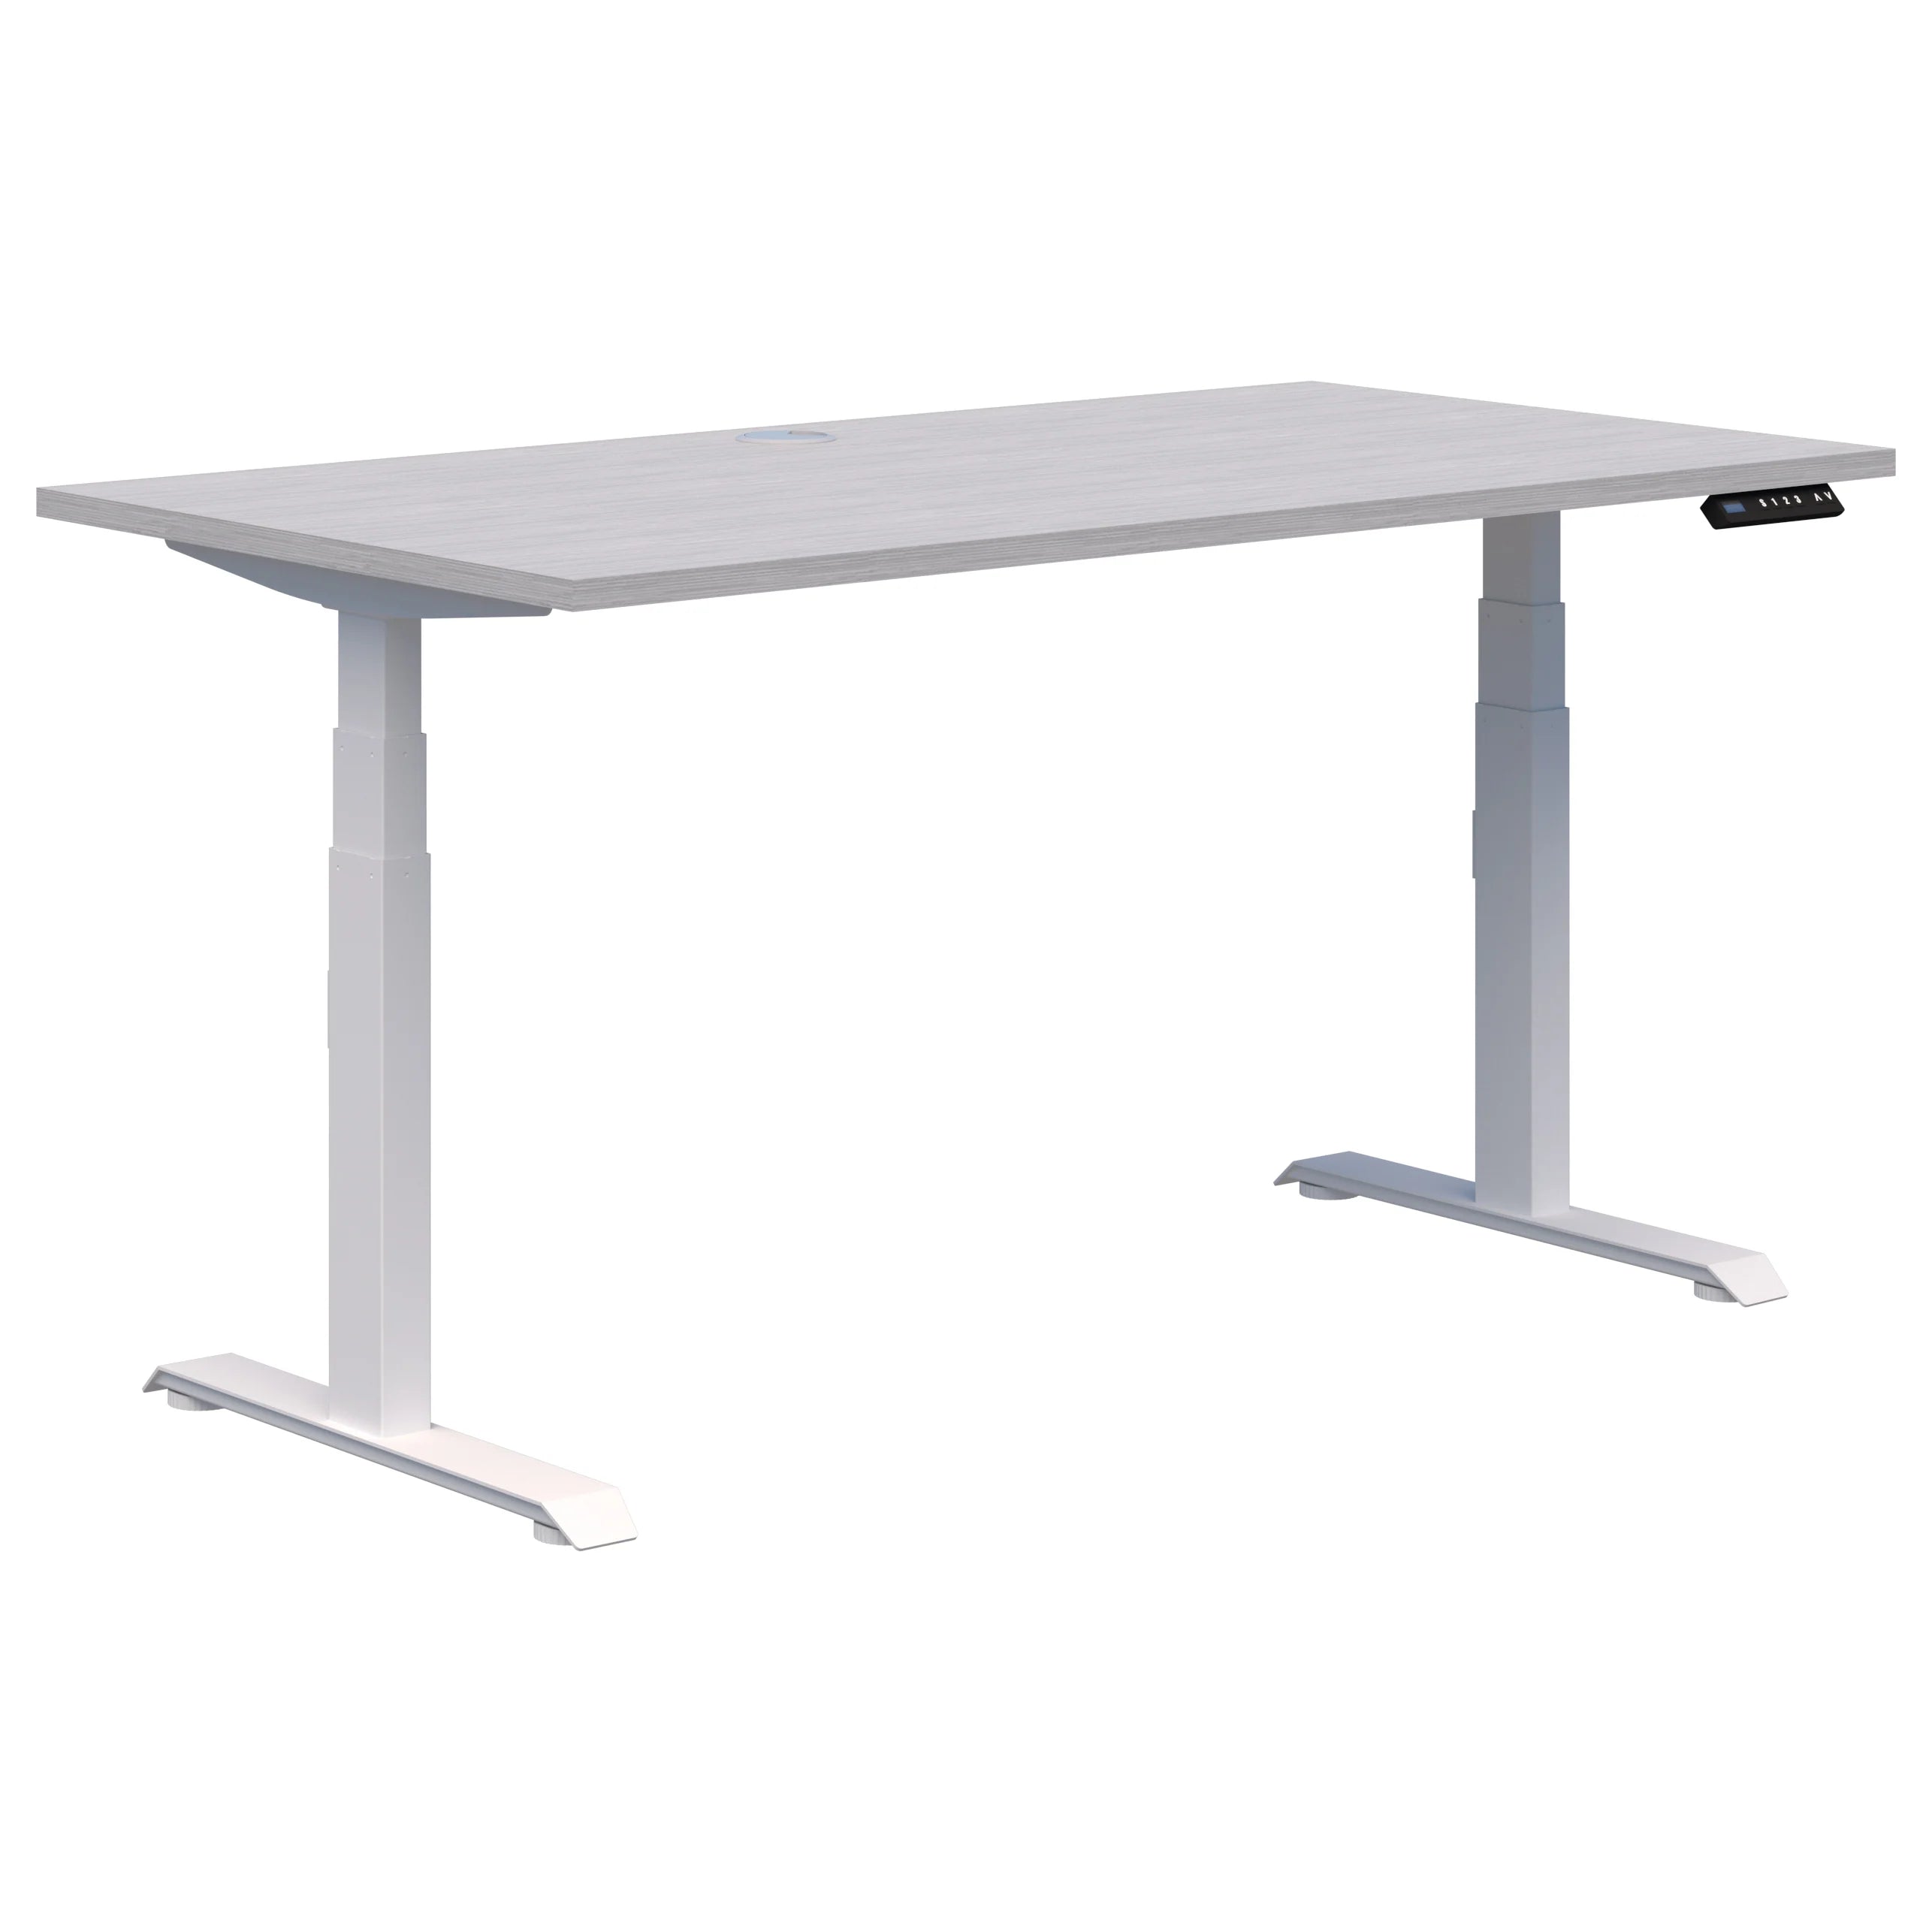 Summit electric height adjustable office desk with white frame and silver strata top.